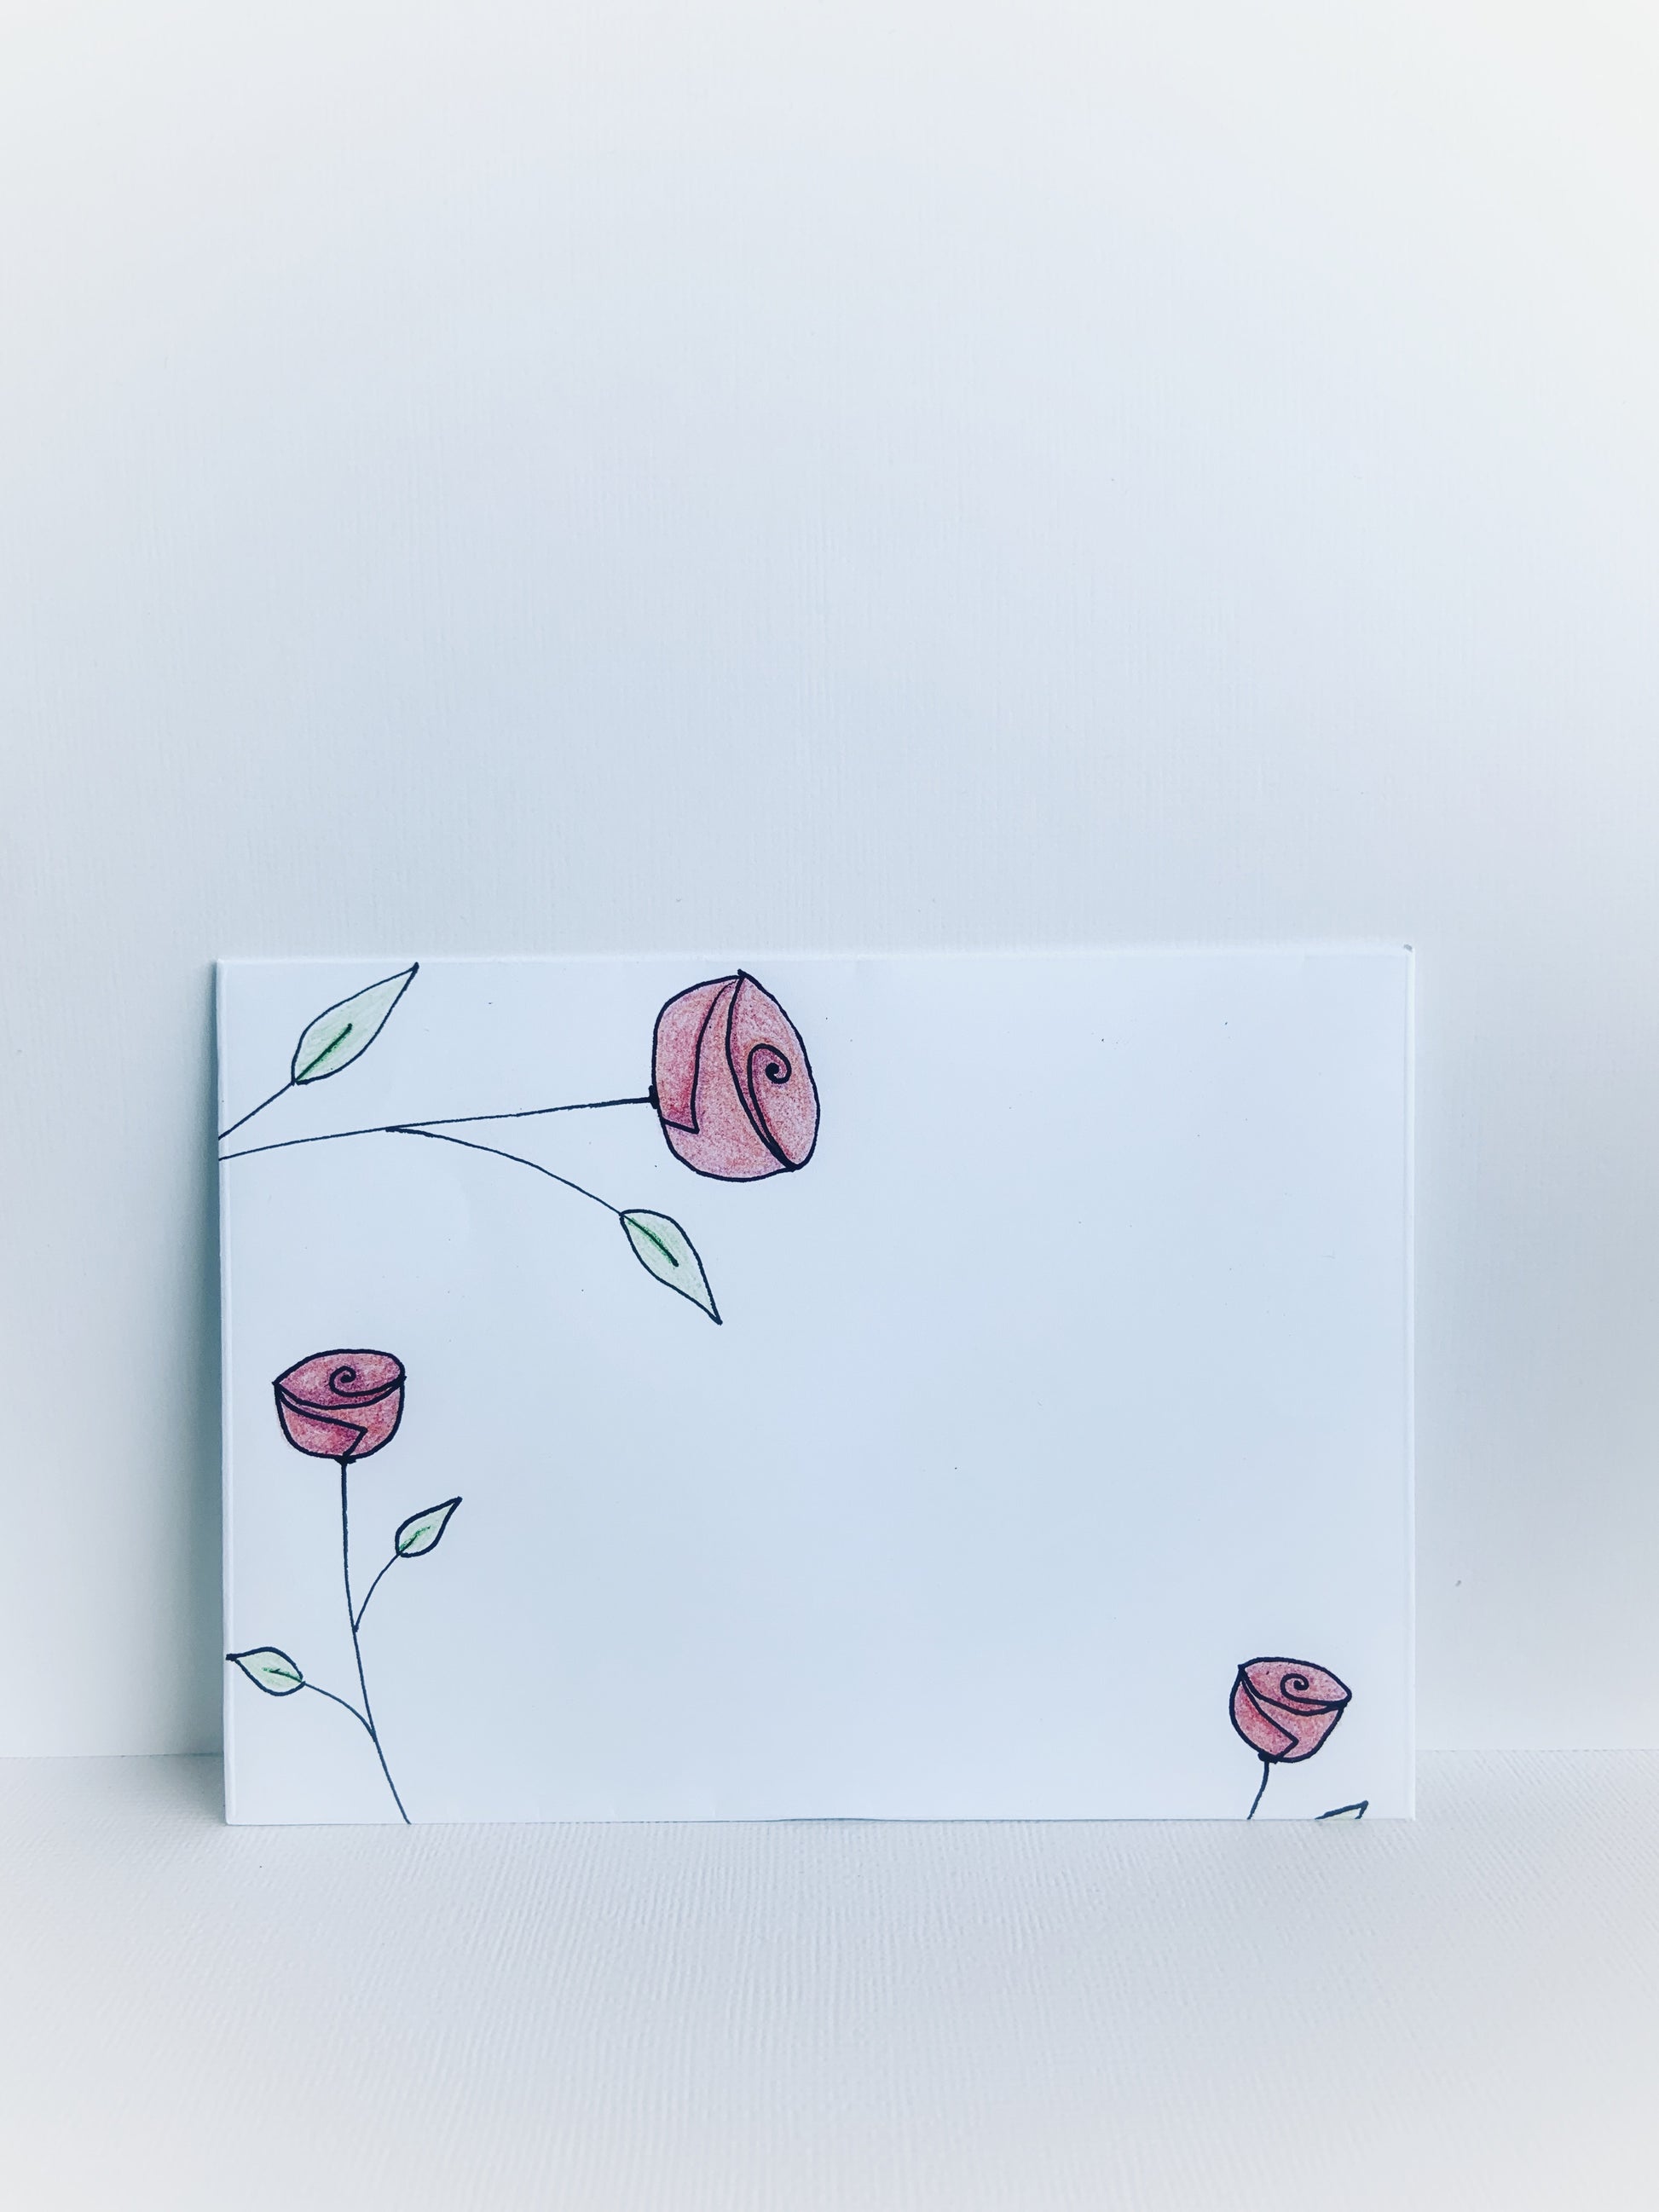 The front of a white handmade envelope with hand drawn pink rosebuds with stems and dainty leaves.